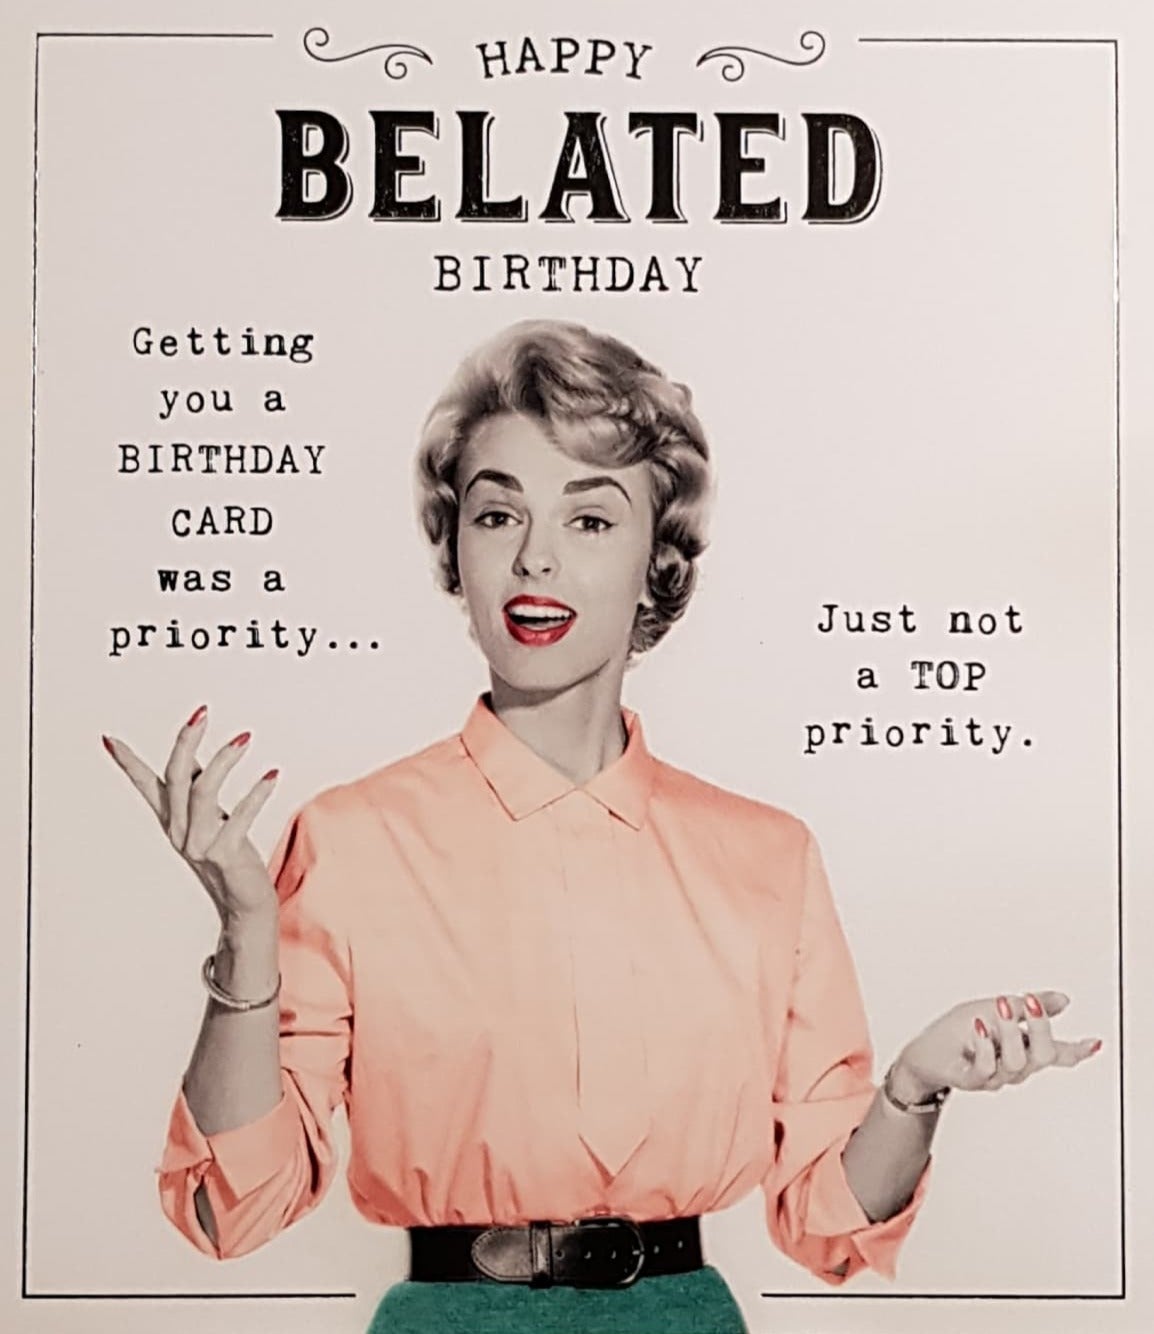 Birthday Card - Belated Birthday / Getting You A Card Was A Priority... (Humour)